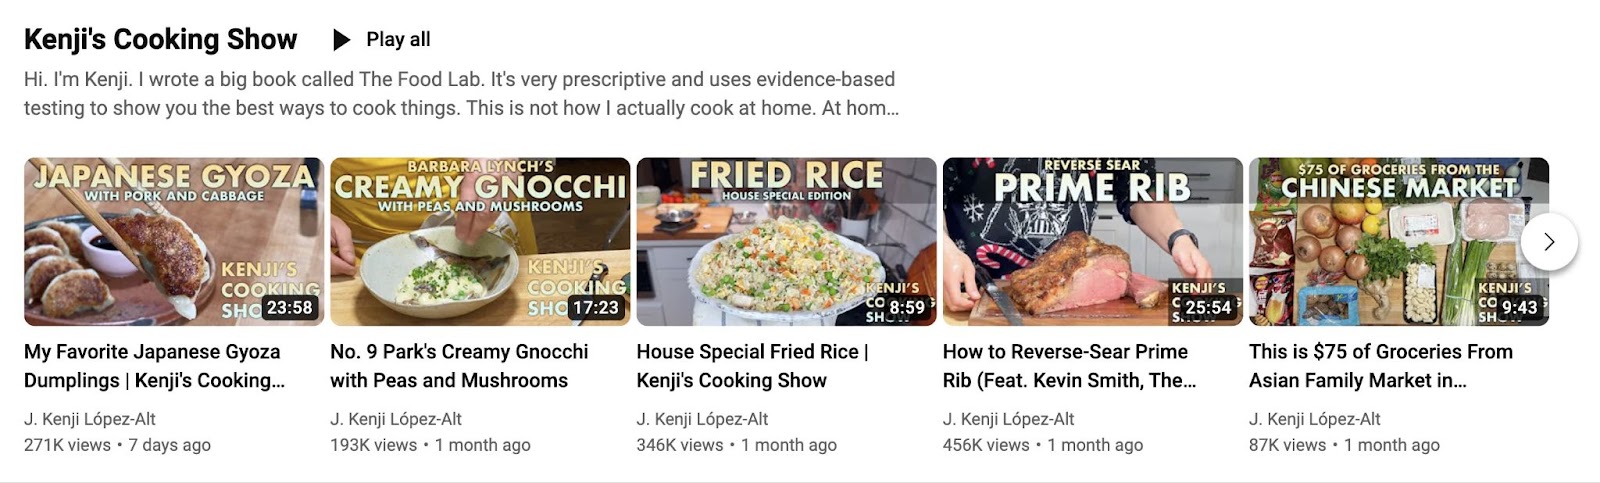 YouTube videos from Kenji's Cooking Show use consistent thumbnails